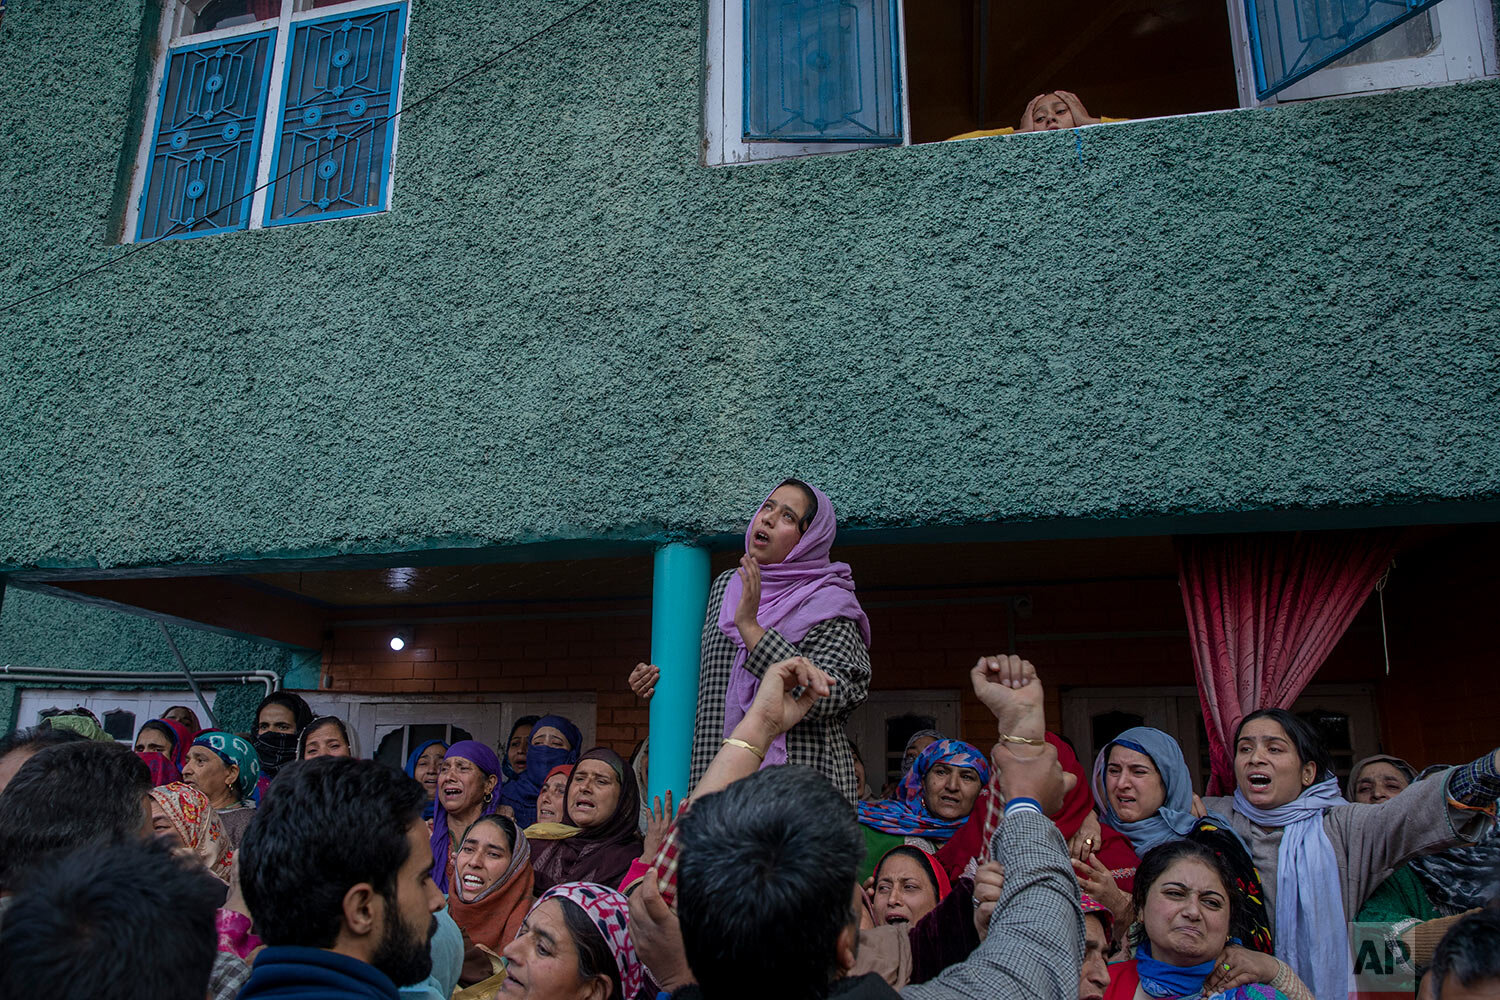  Relatives mourn during the funeral of Fida Hussain, a local leader of India's ruling Bharatiya Janata Party (BJP), in Qazigund, south of Srinagar, Indian controlled Kashmir, Friday, Oct. 30, 2020. (AP Photo/Dar Yasin) 